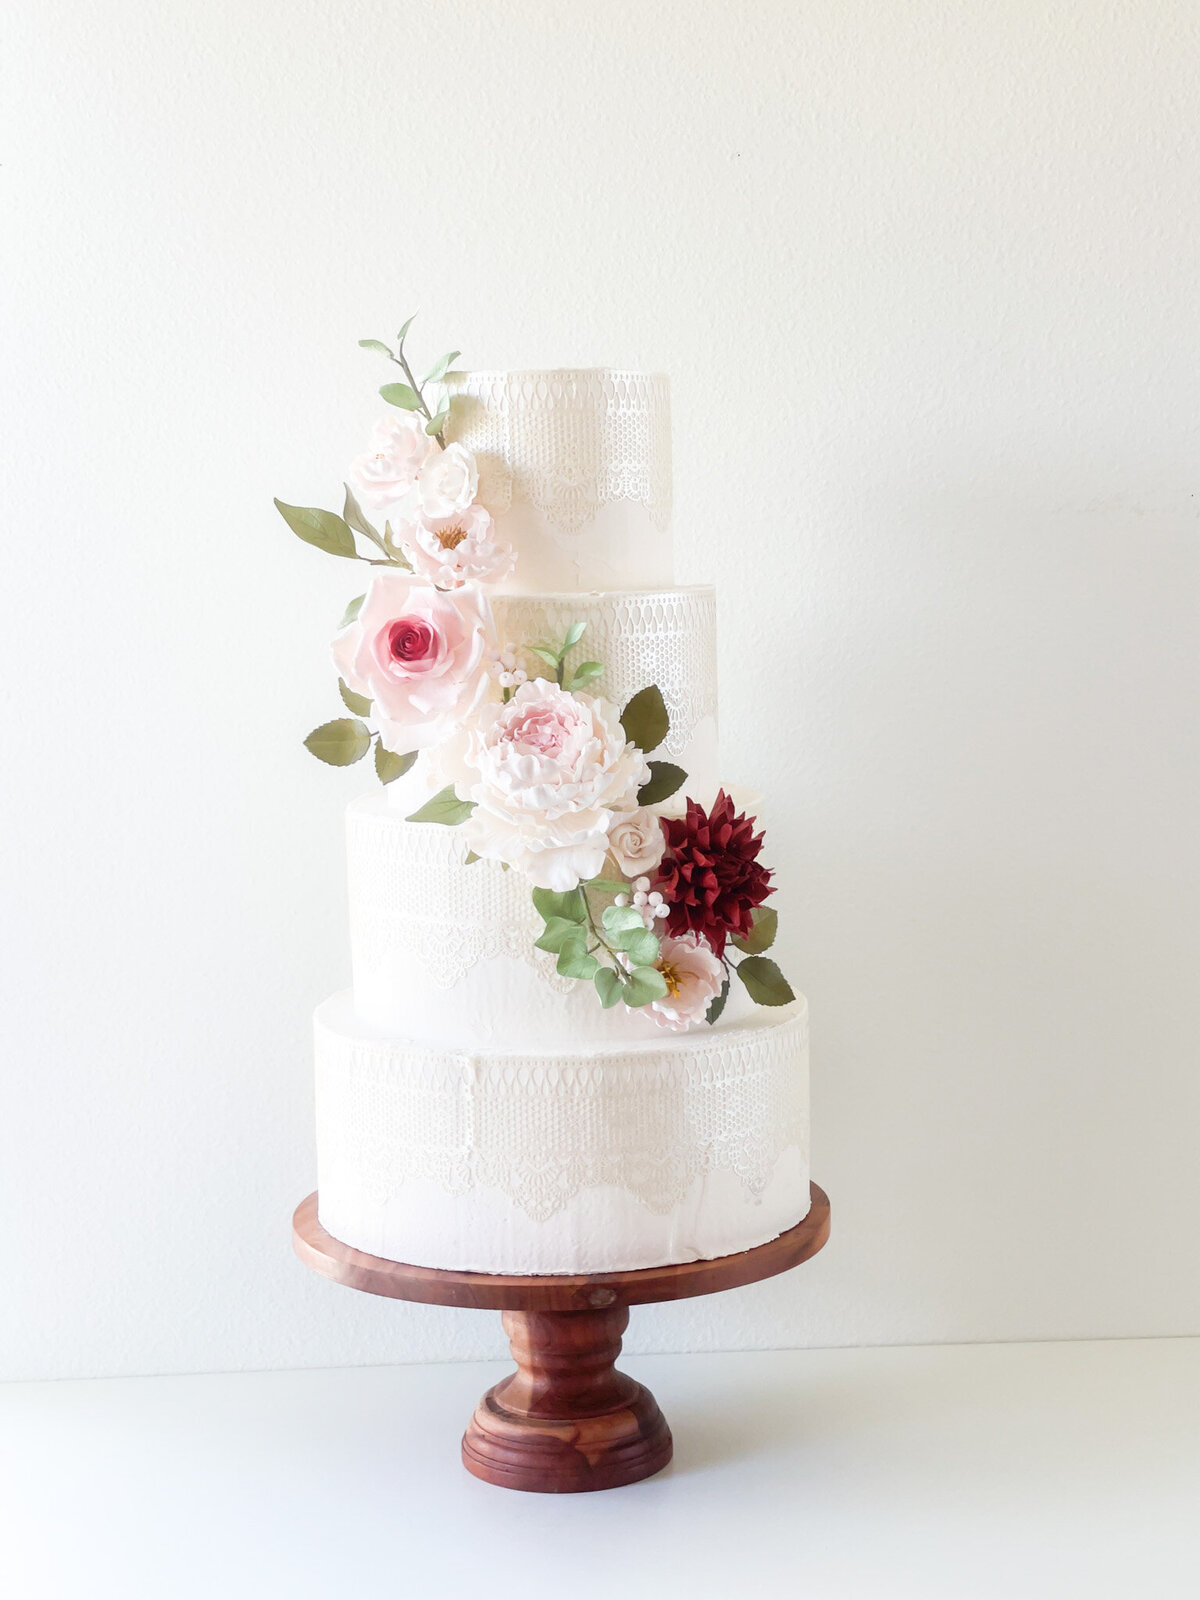 sugar-flower-cascade-on-four-tier-cake-with-dusty-pink-and-burgundy-roses-dahlias-peonies-sugar-flowers